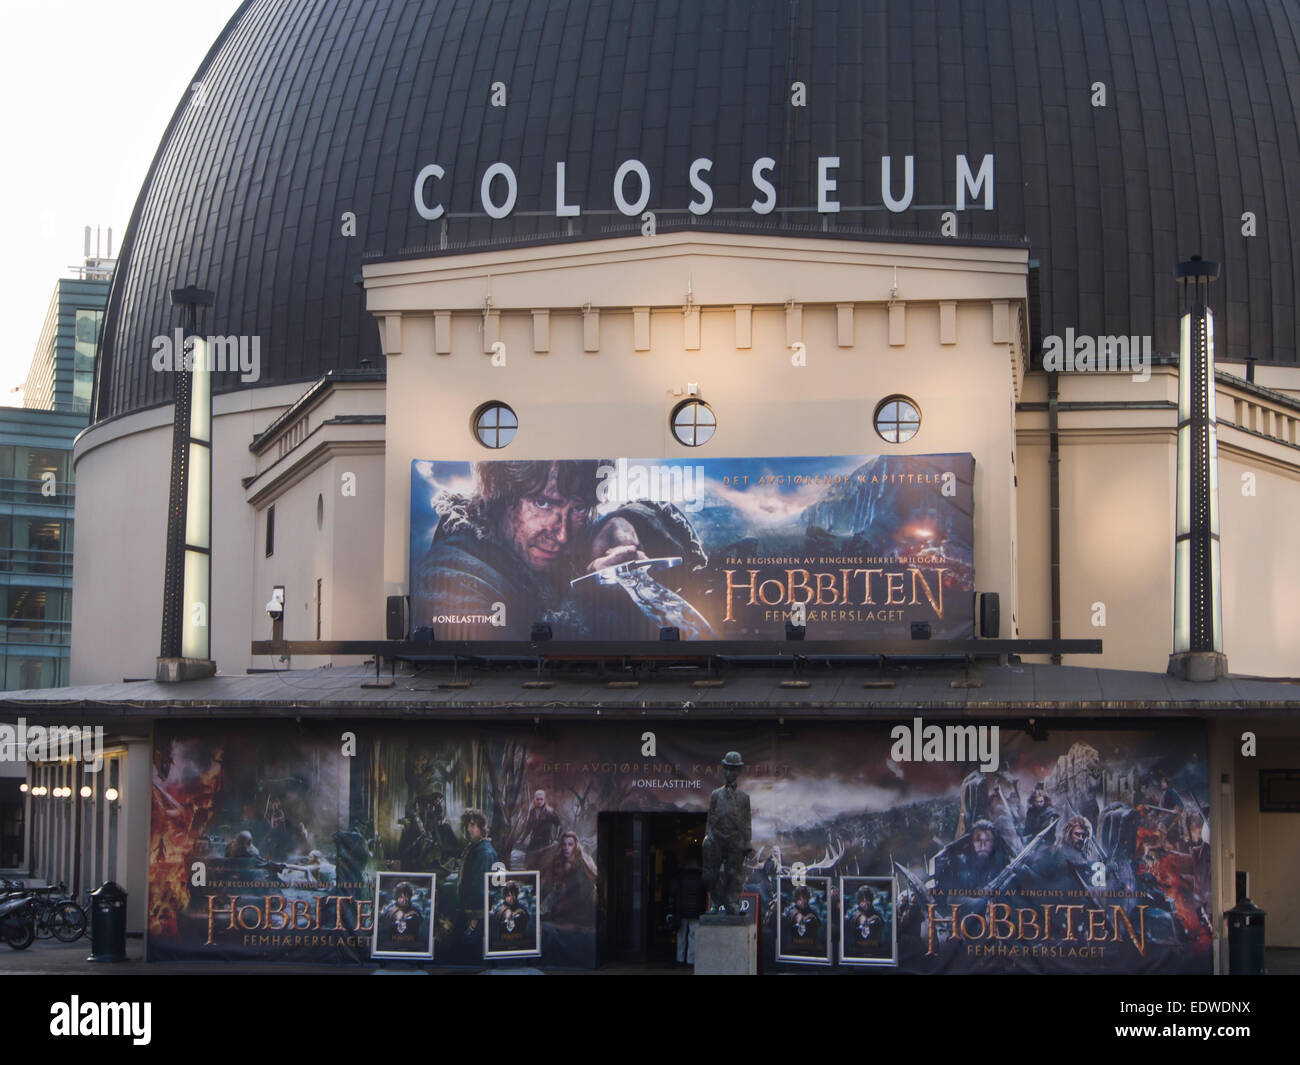 Colosseum kino, domed cinema in Majorstua Oslo Norway, exterior view, entrance with advertisement for the Hobbit film Stock Photo